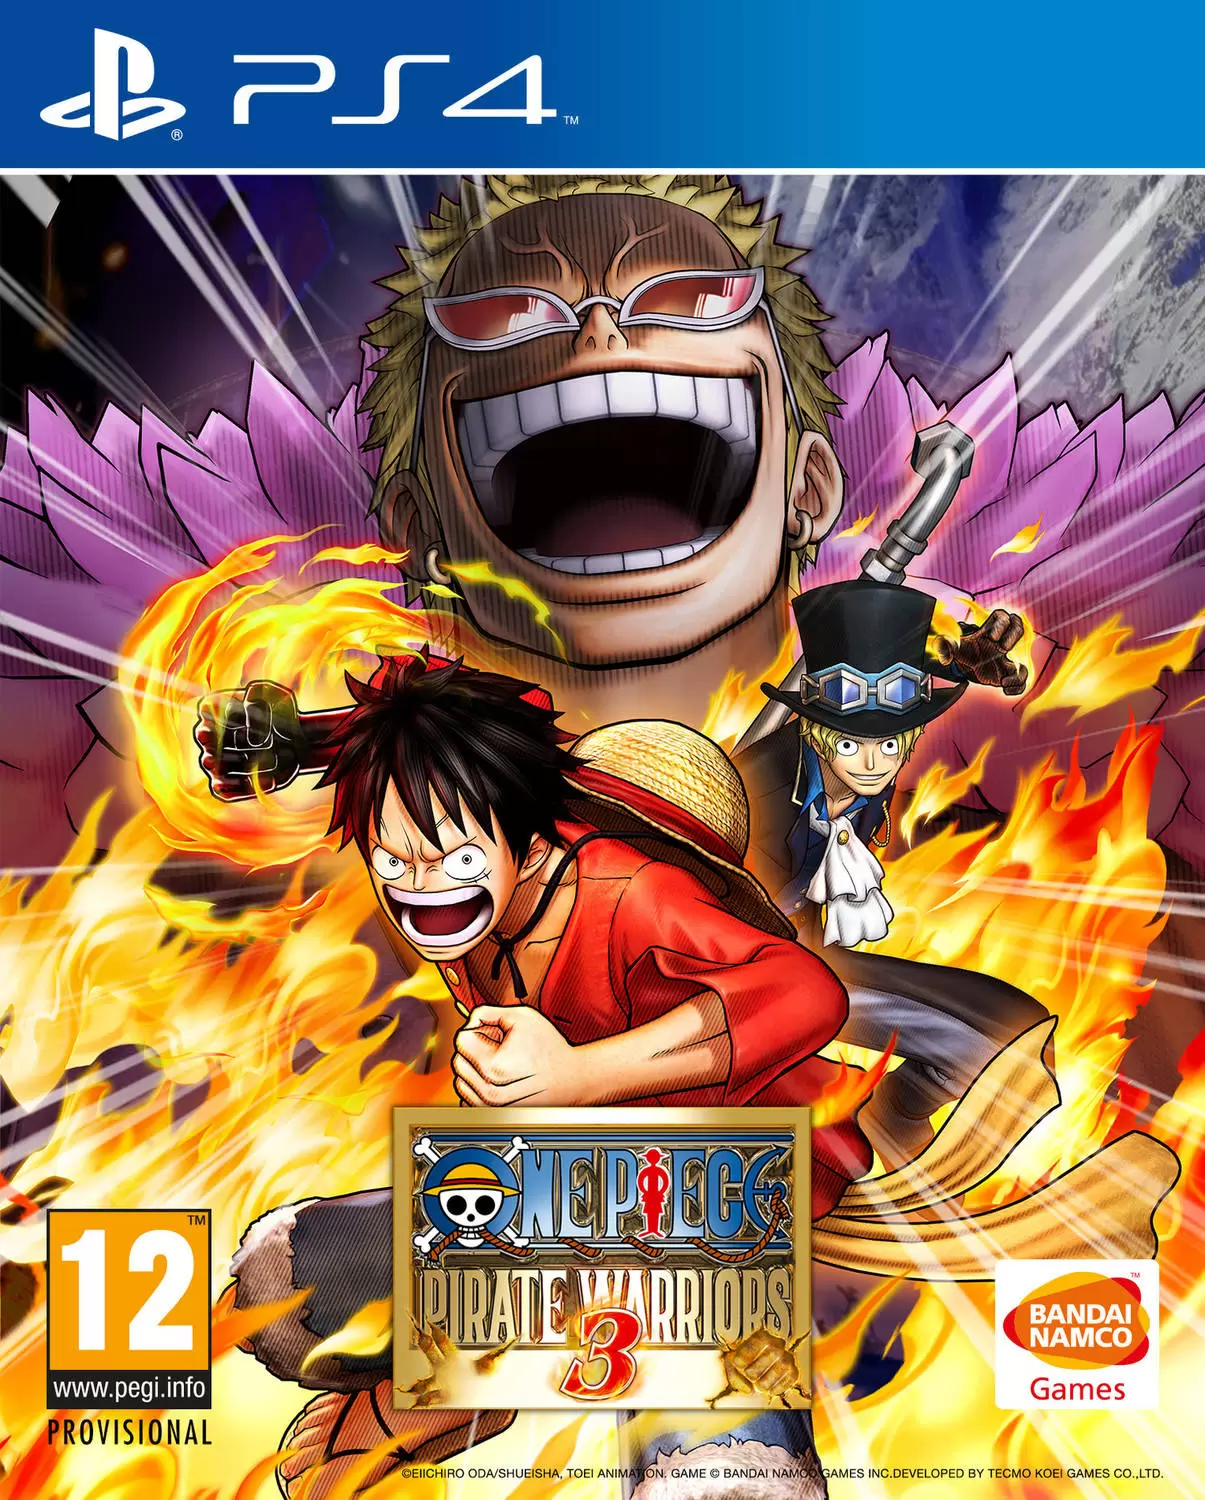 PS4 Games - One Piece: Pirate Warriors 3